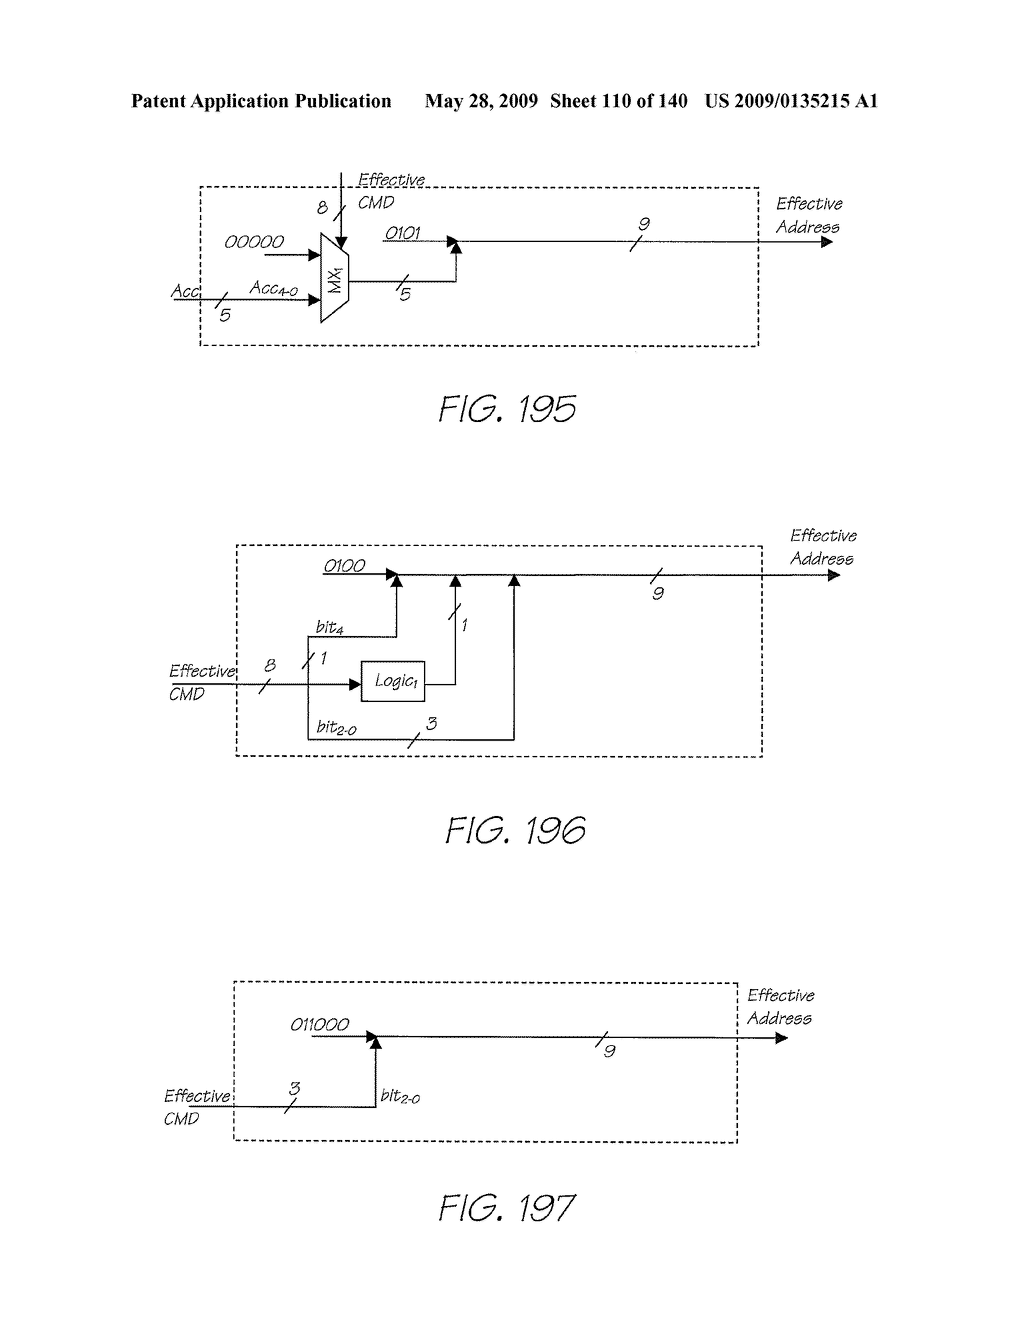 CAMERA DEVICE INCORPORATING A COLOR PRINTER WITH INK VALIDATION APPARATUS - diagram, schematic, and image 111